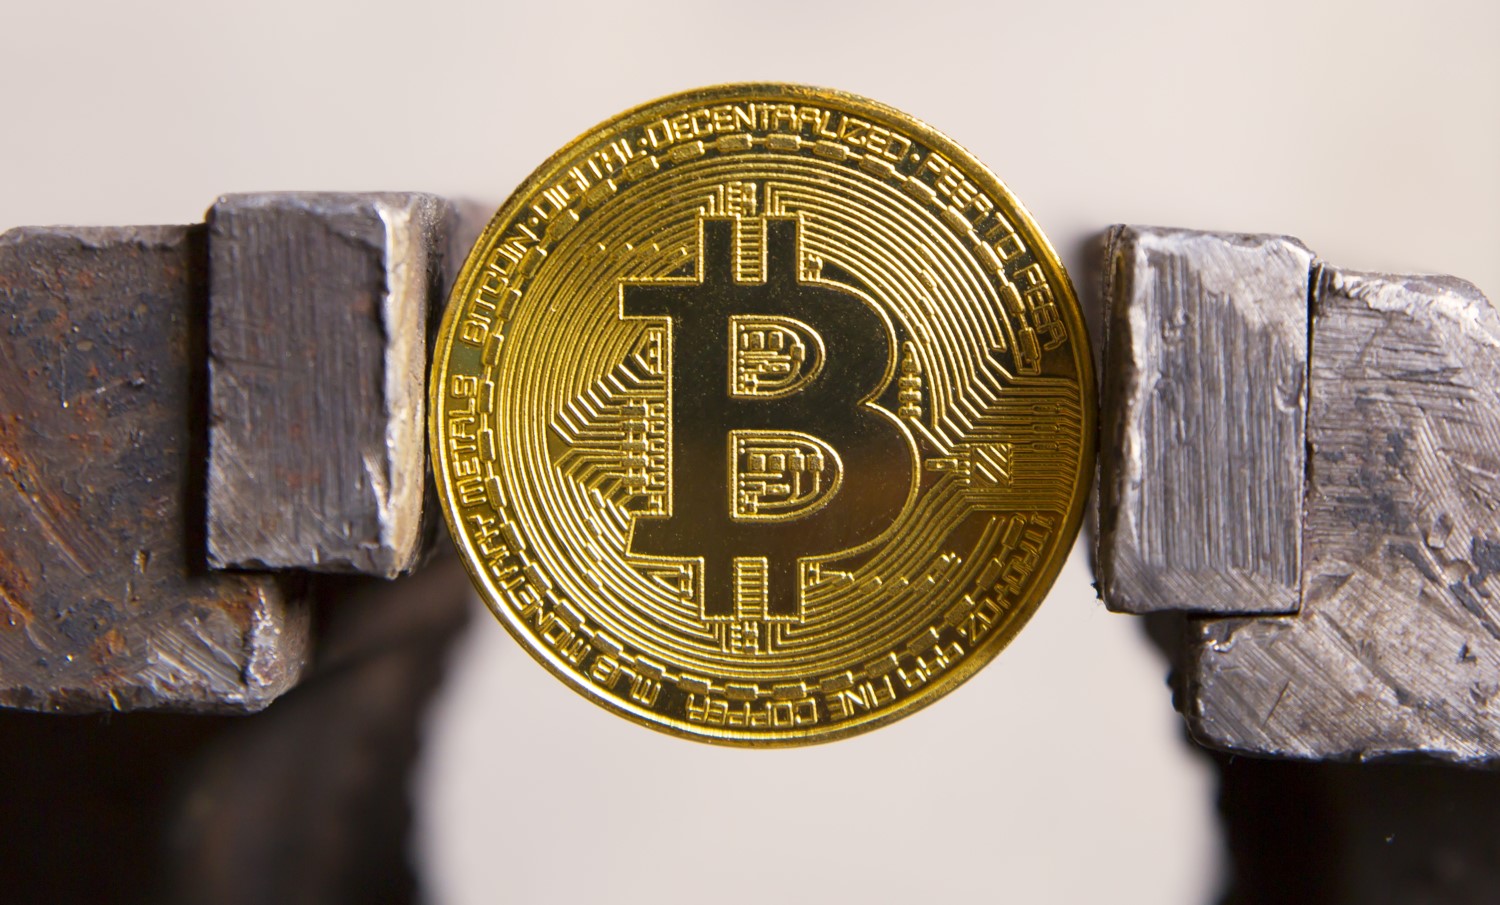 No Man’s Land: Bitcoin Price Locked In $600 Range For Seventh Day